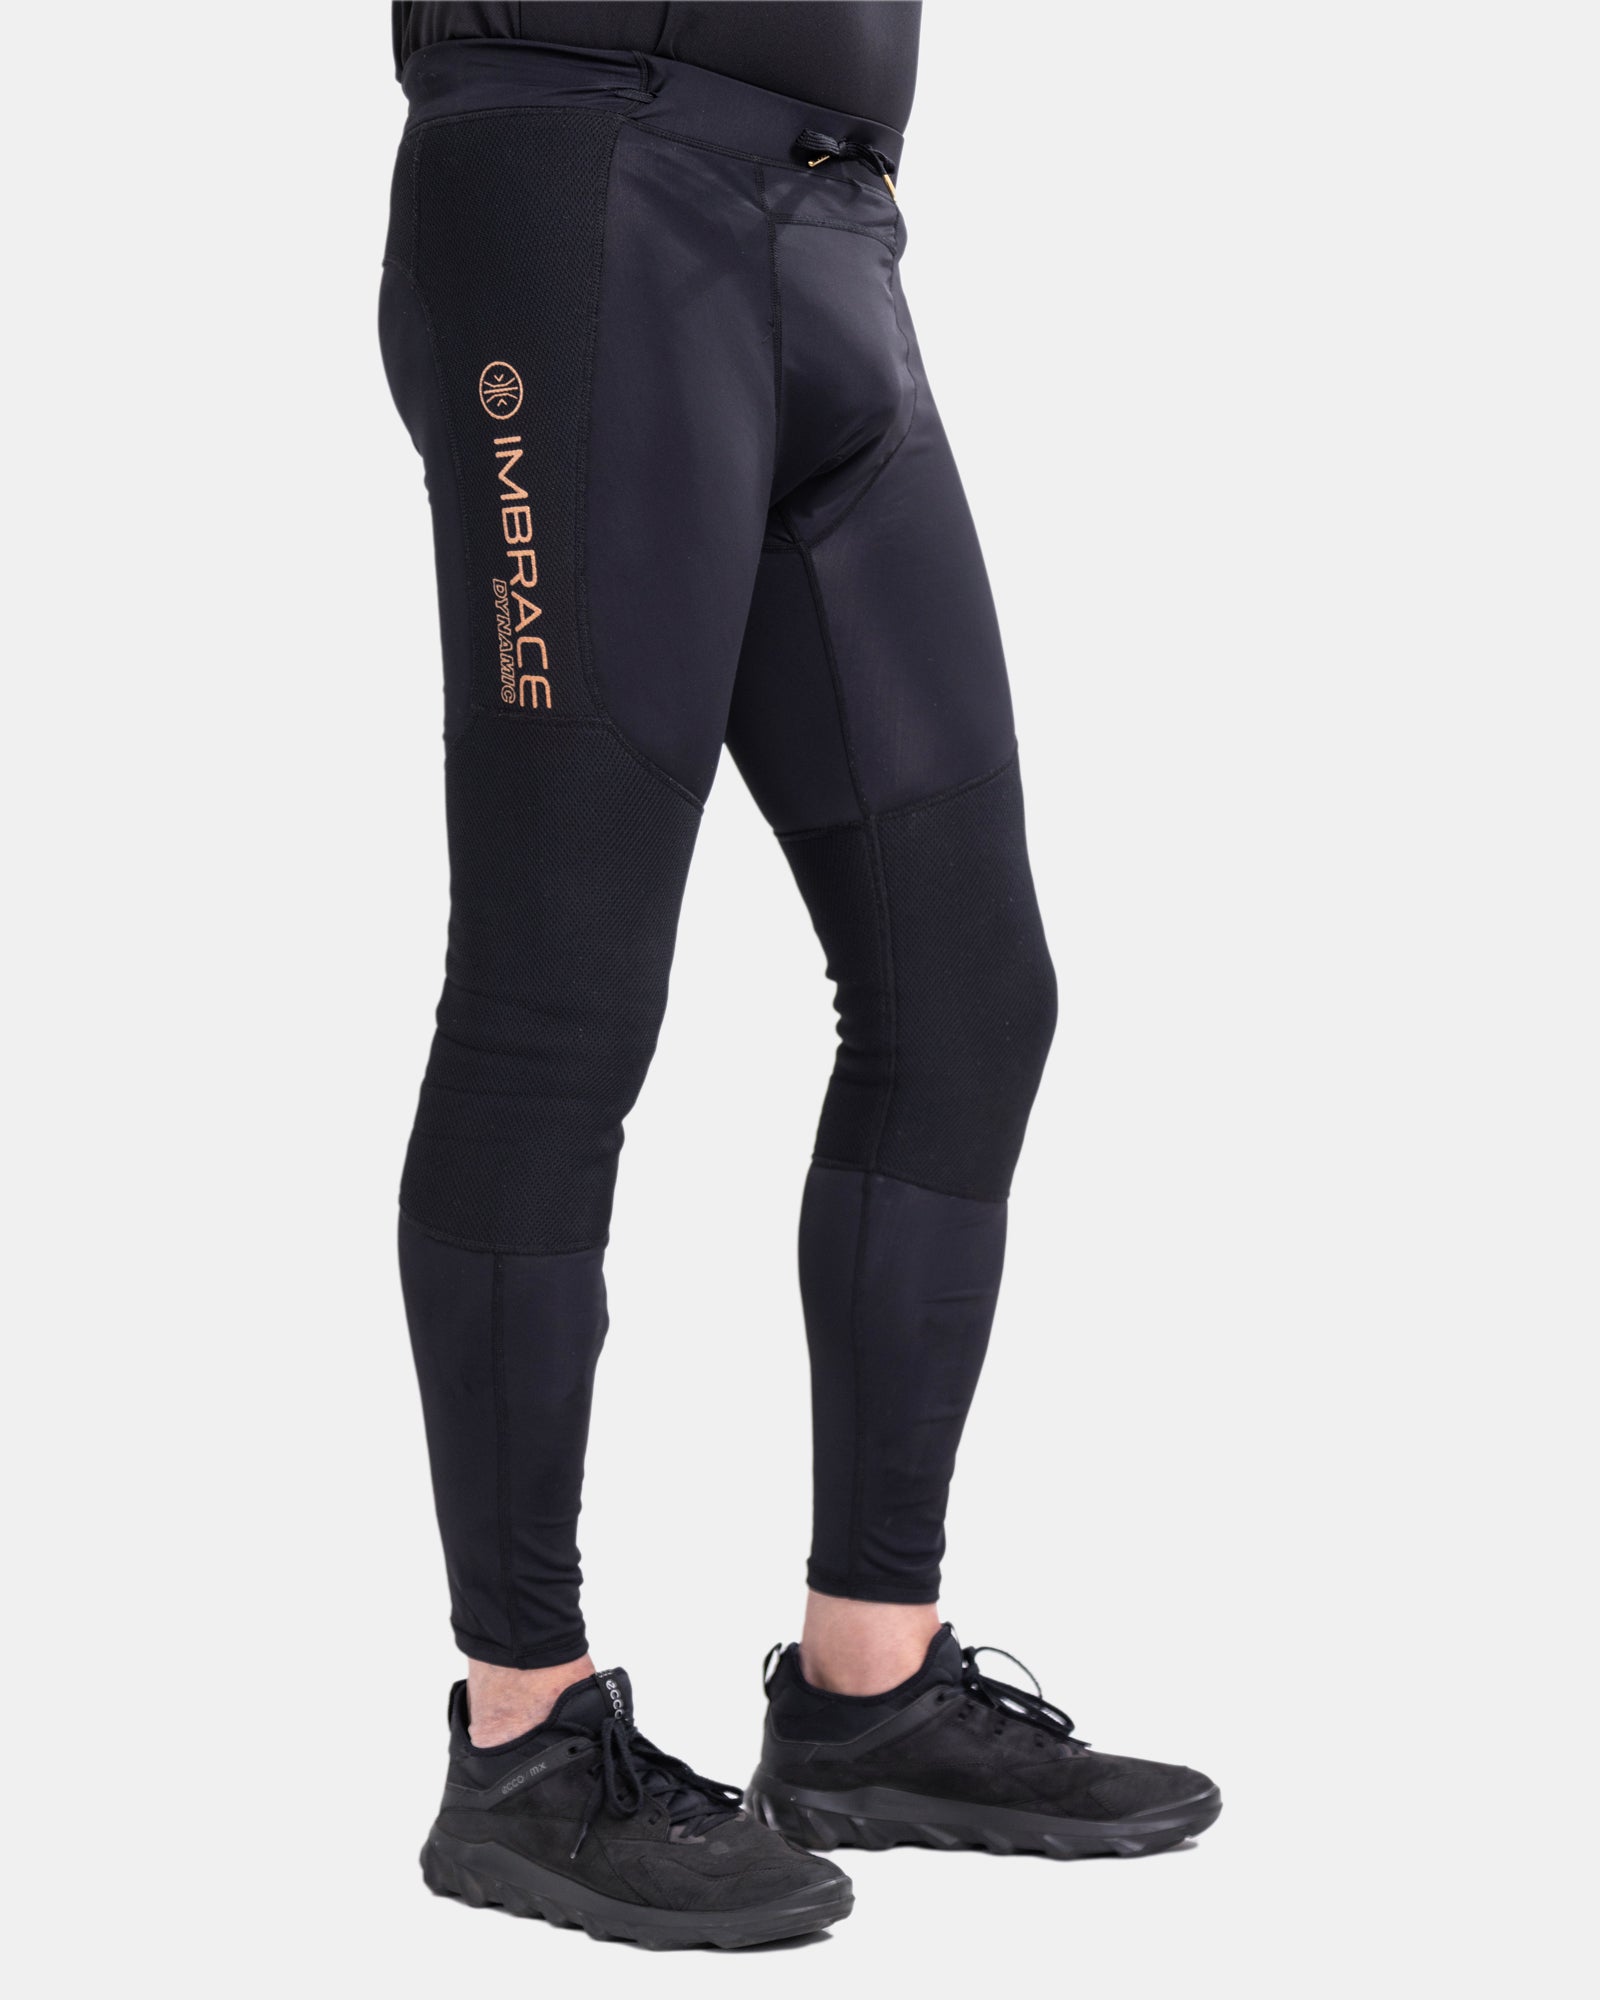 Men’s Dynamic Active Recovery Legging